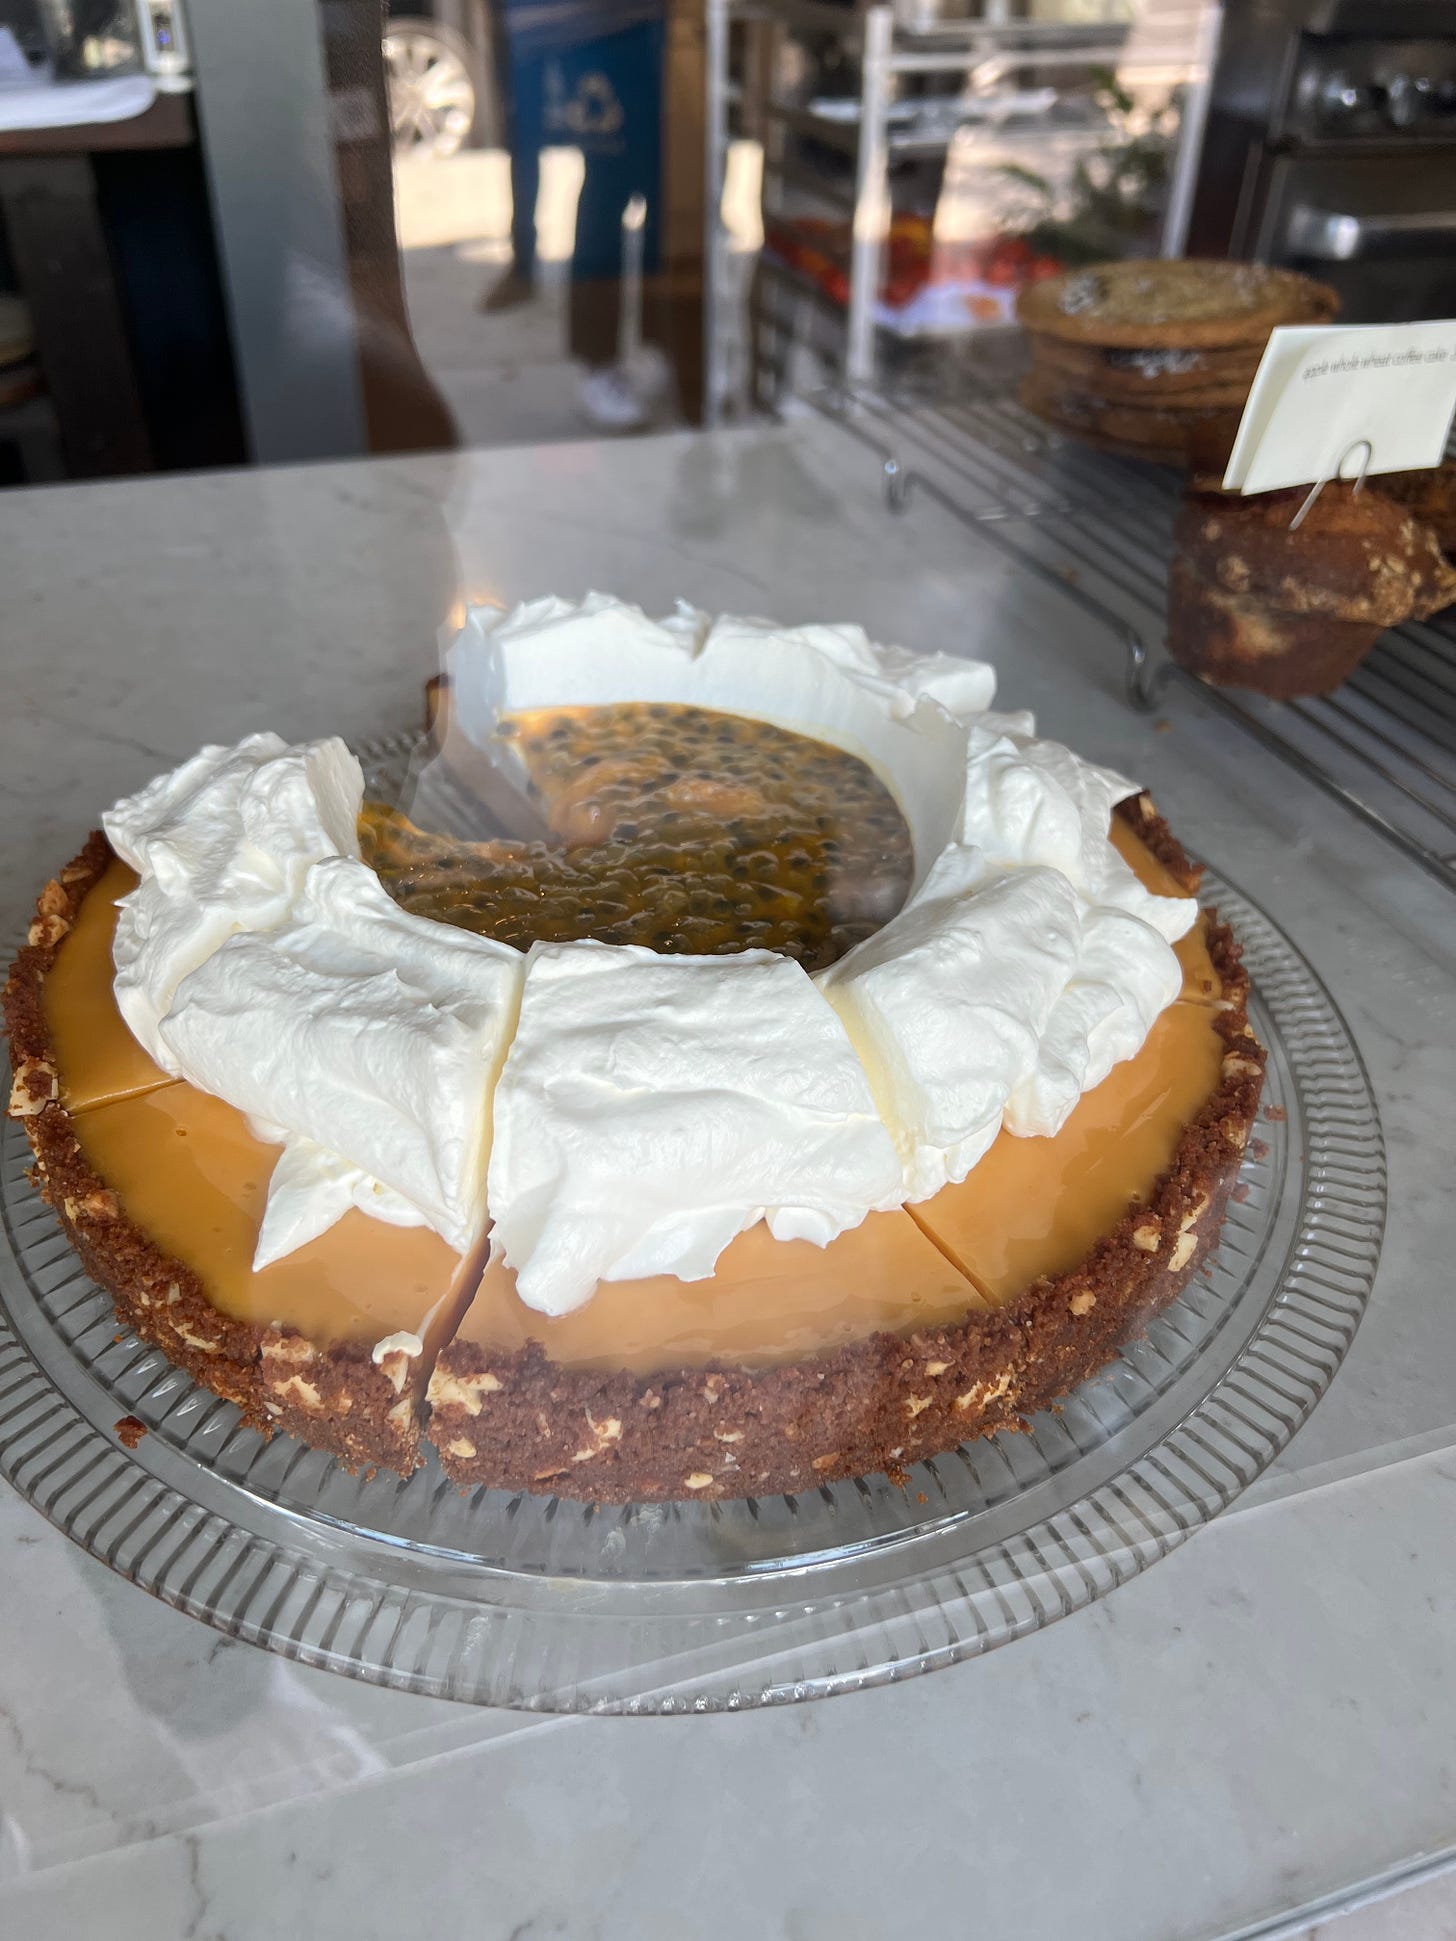 The passionfruit pie at Doubting Thomas